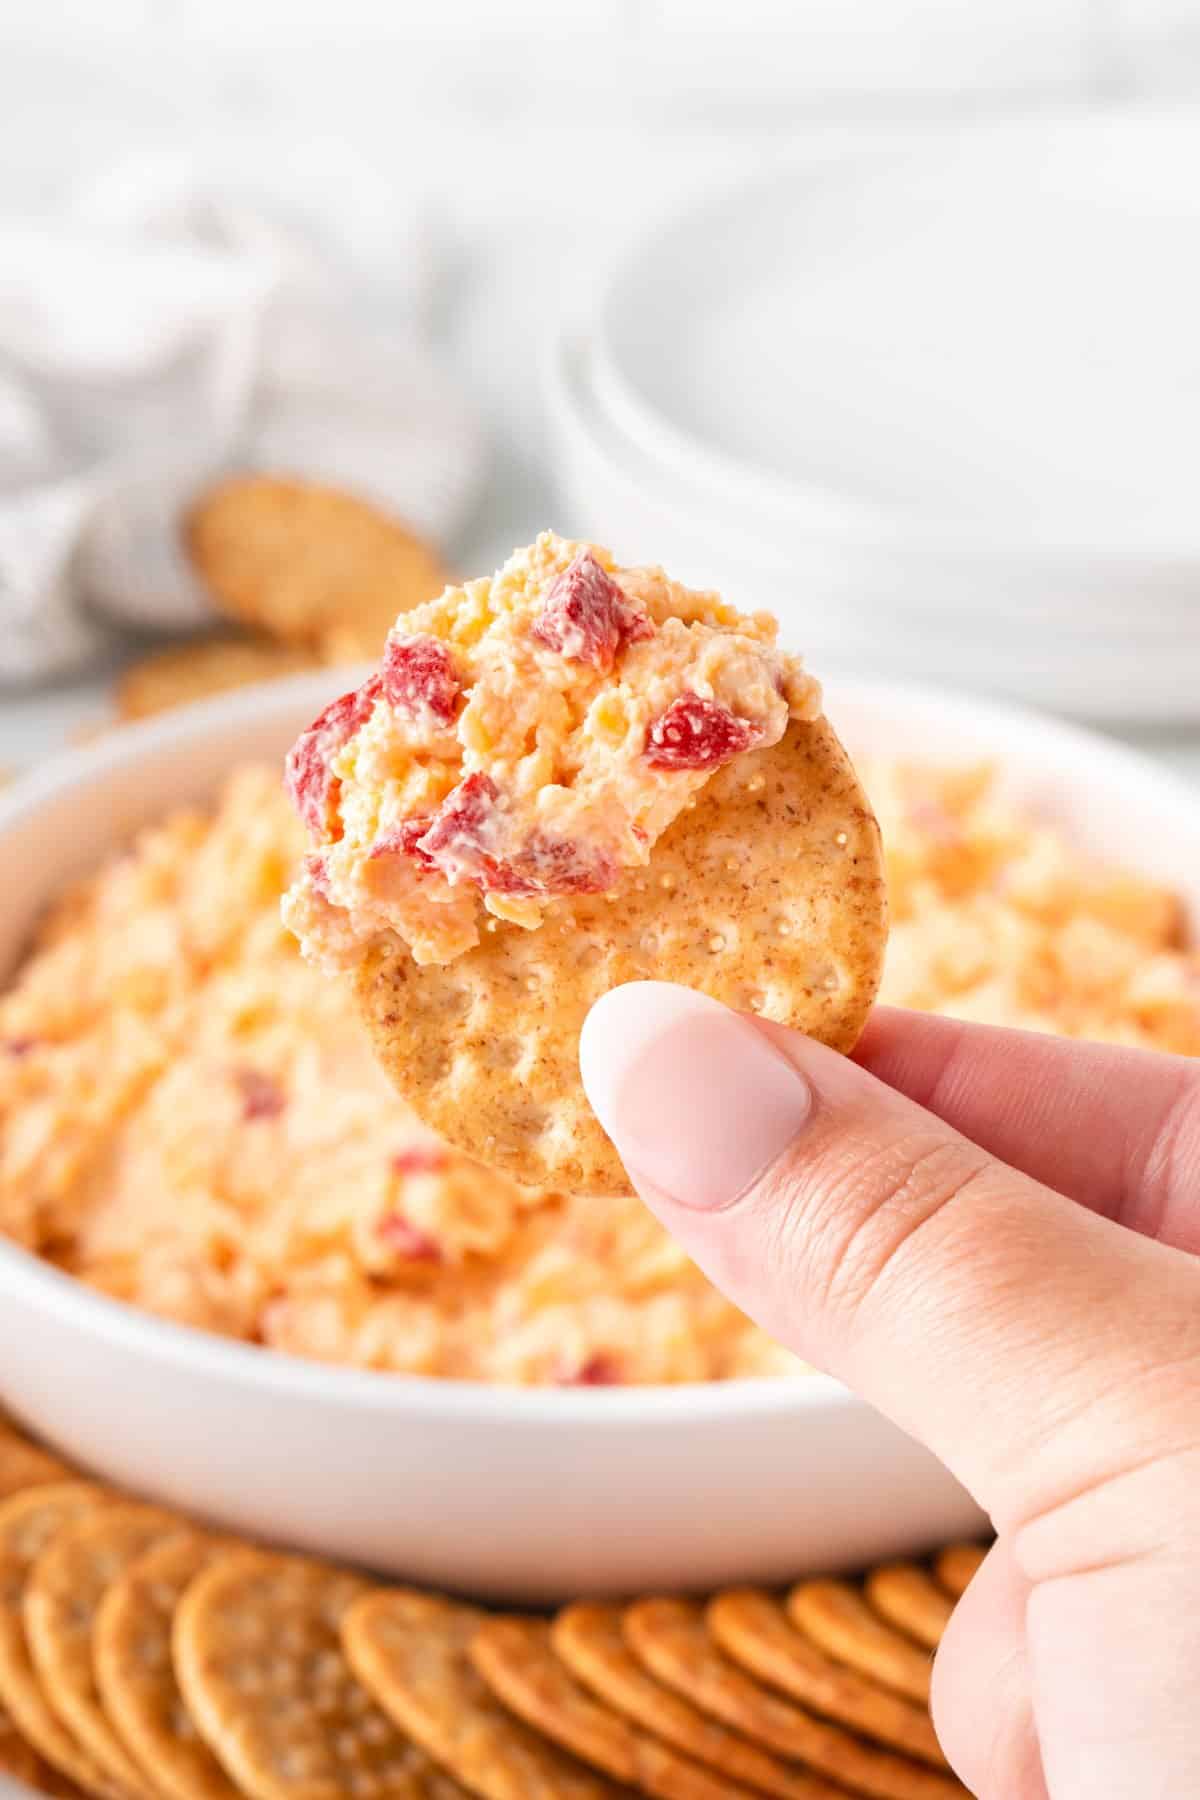 pimento cheese on a cracker